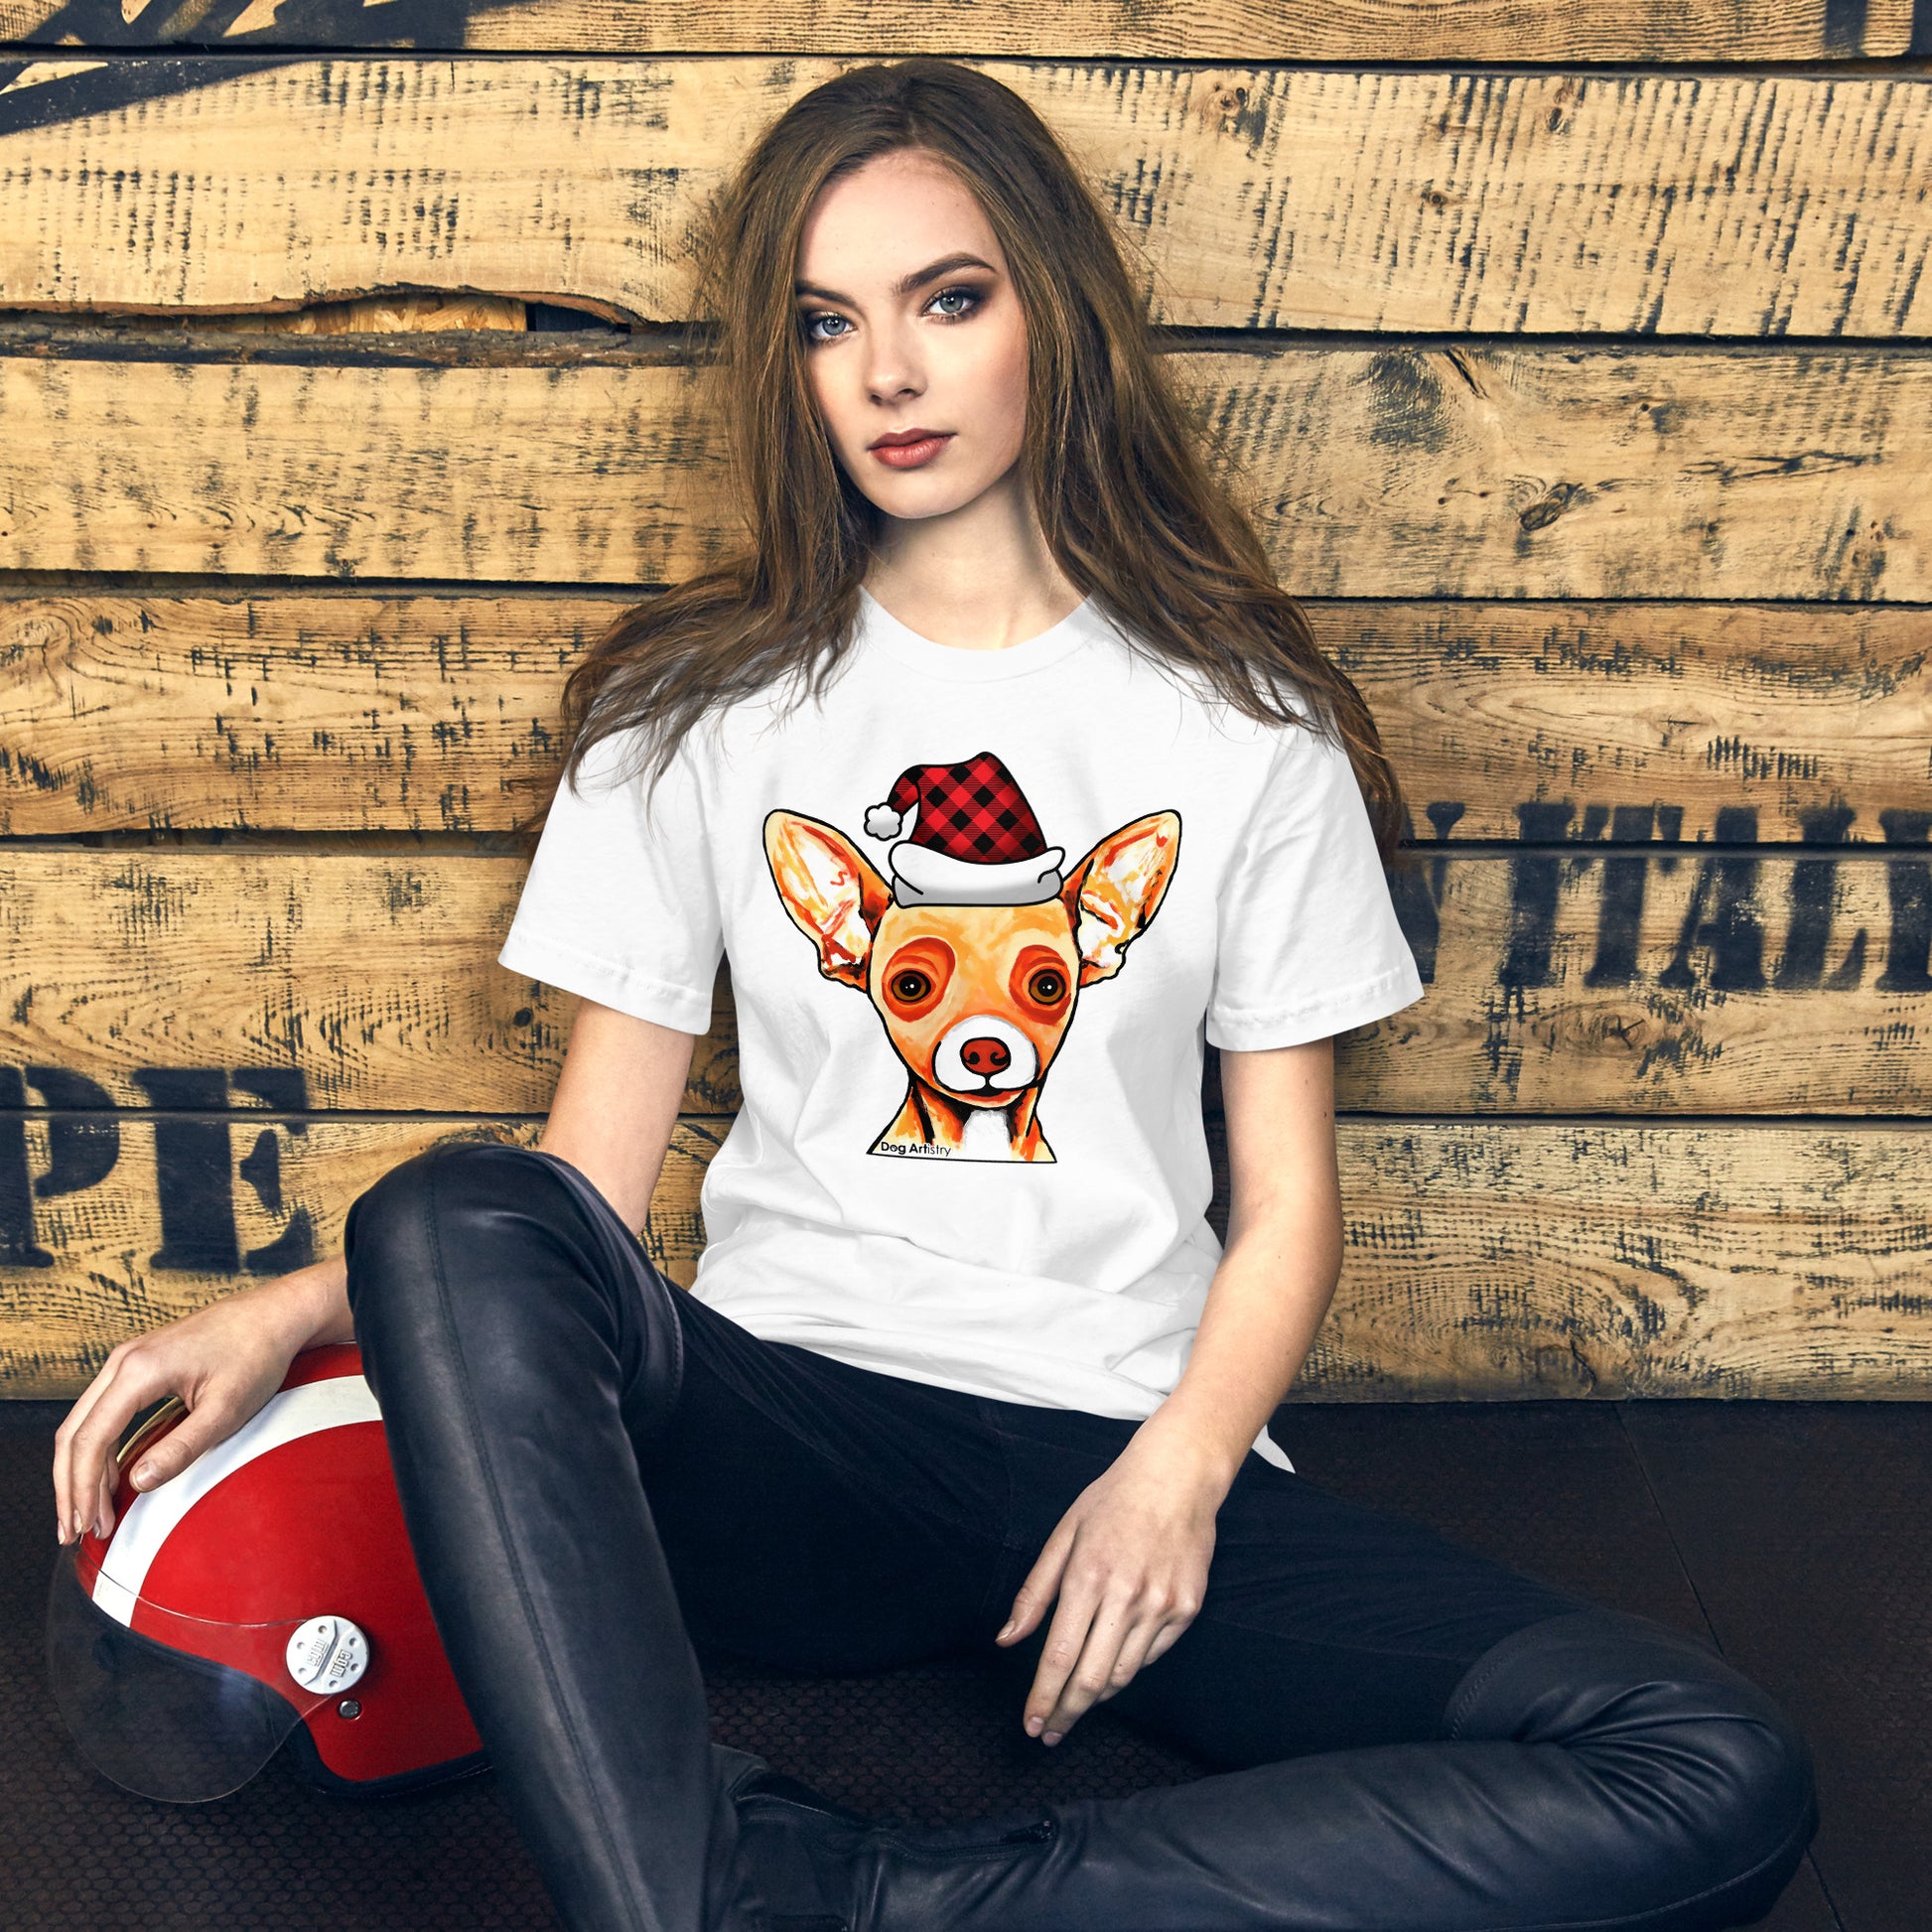 Chihuahua Holiday unisex t-shirt white by Dog Artistry